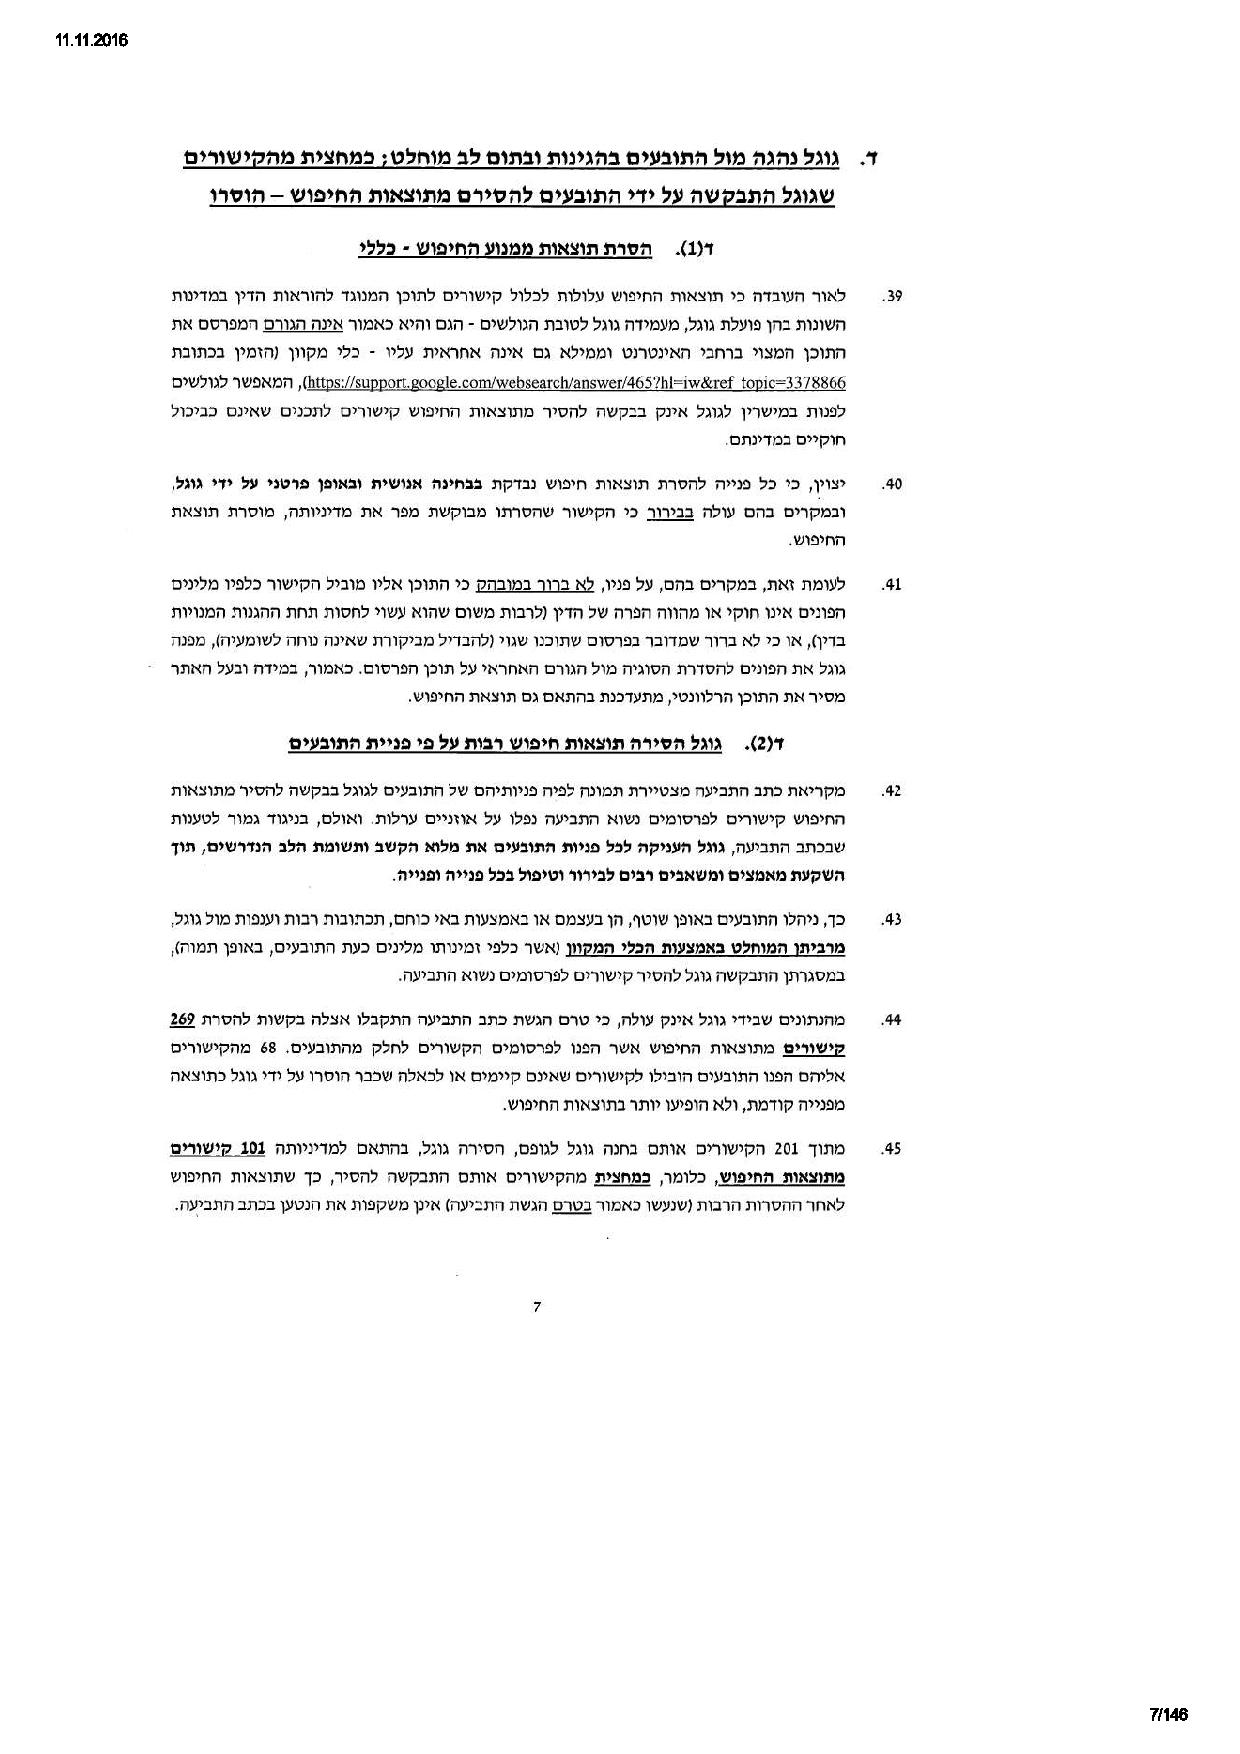 document-page-007